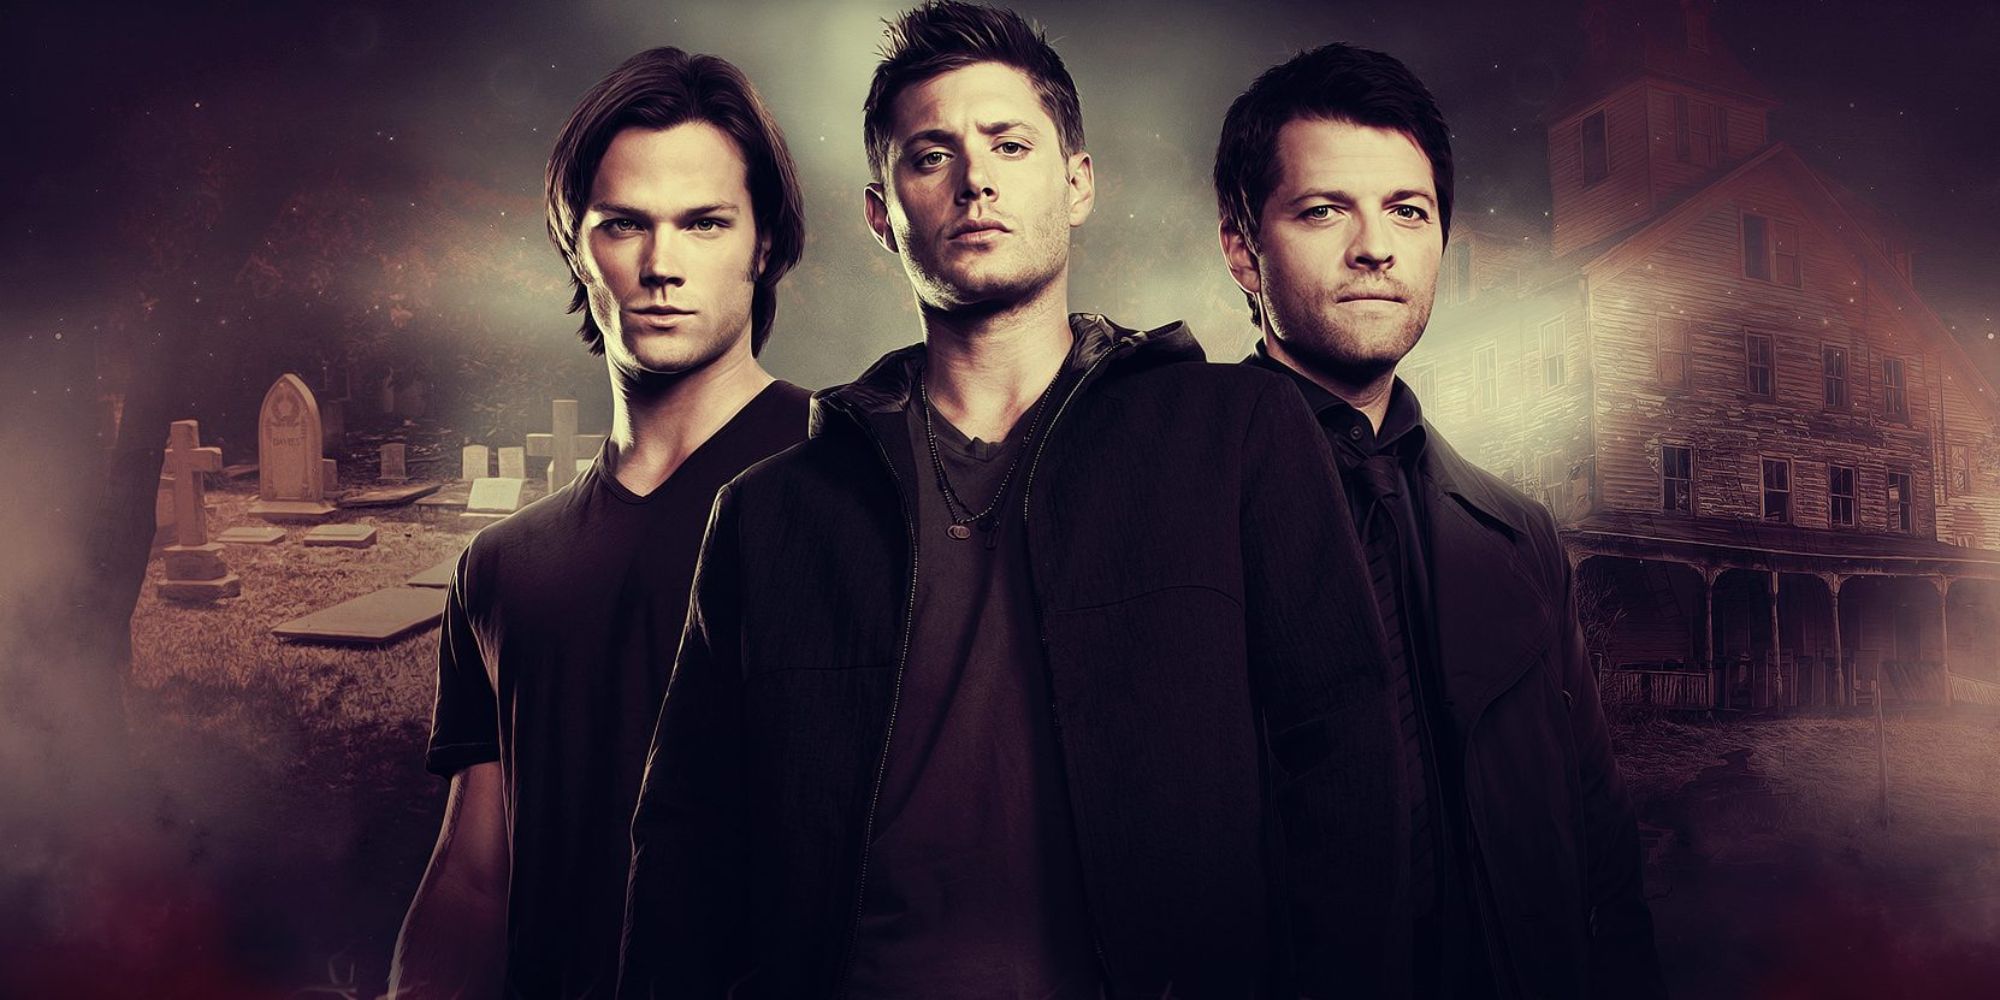 Sam, Dean, and Cas in a poster for Supernatural Season 5